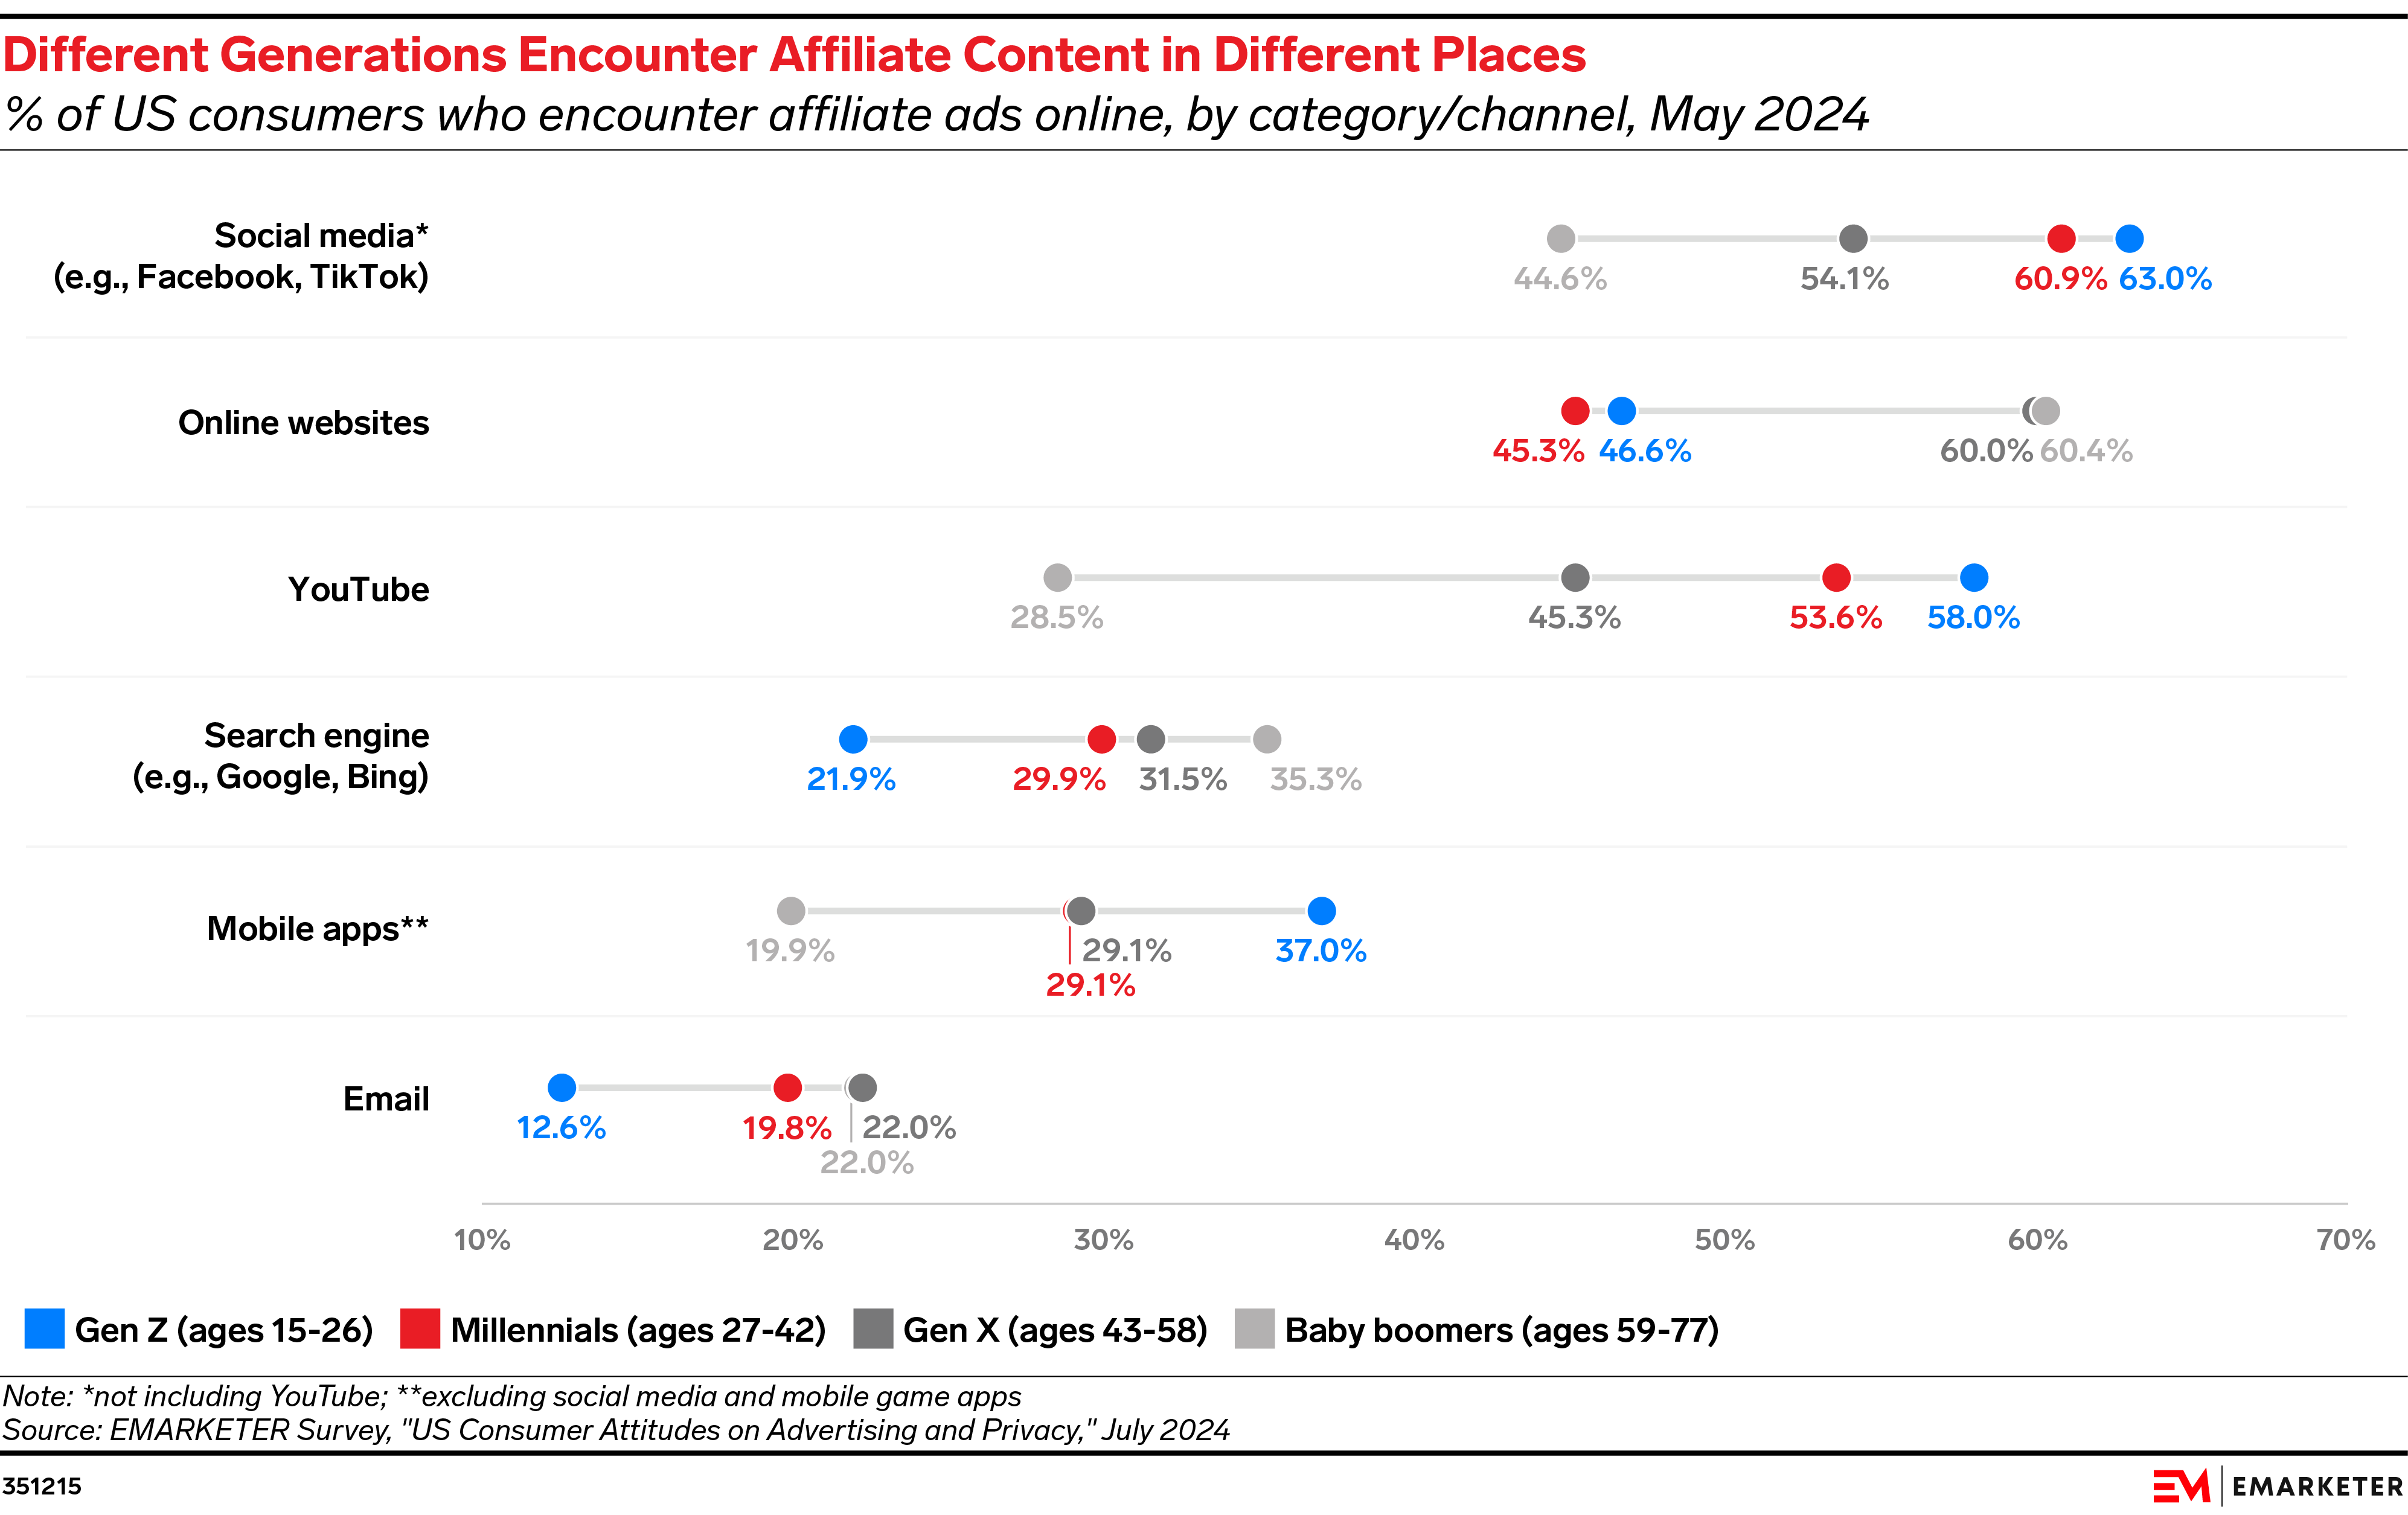  Different Generations Encounter Affiliate Content in Different Places (% of US consumers who encounter affiliate ads online, by category/channel, May 2024)